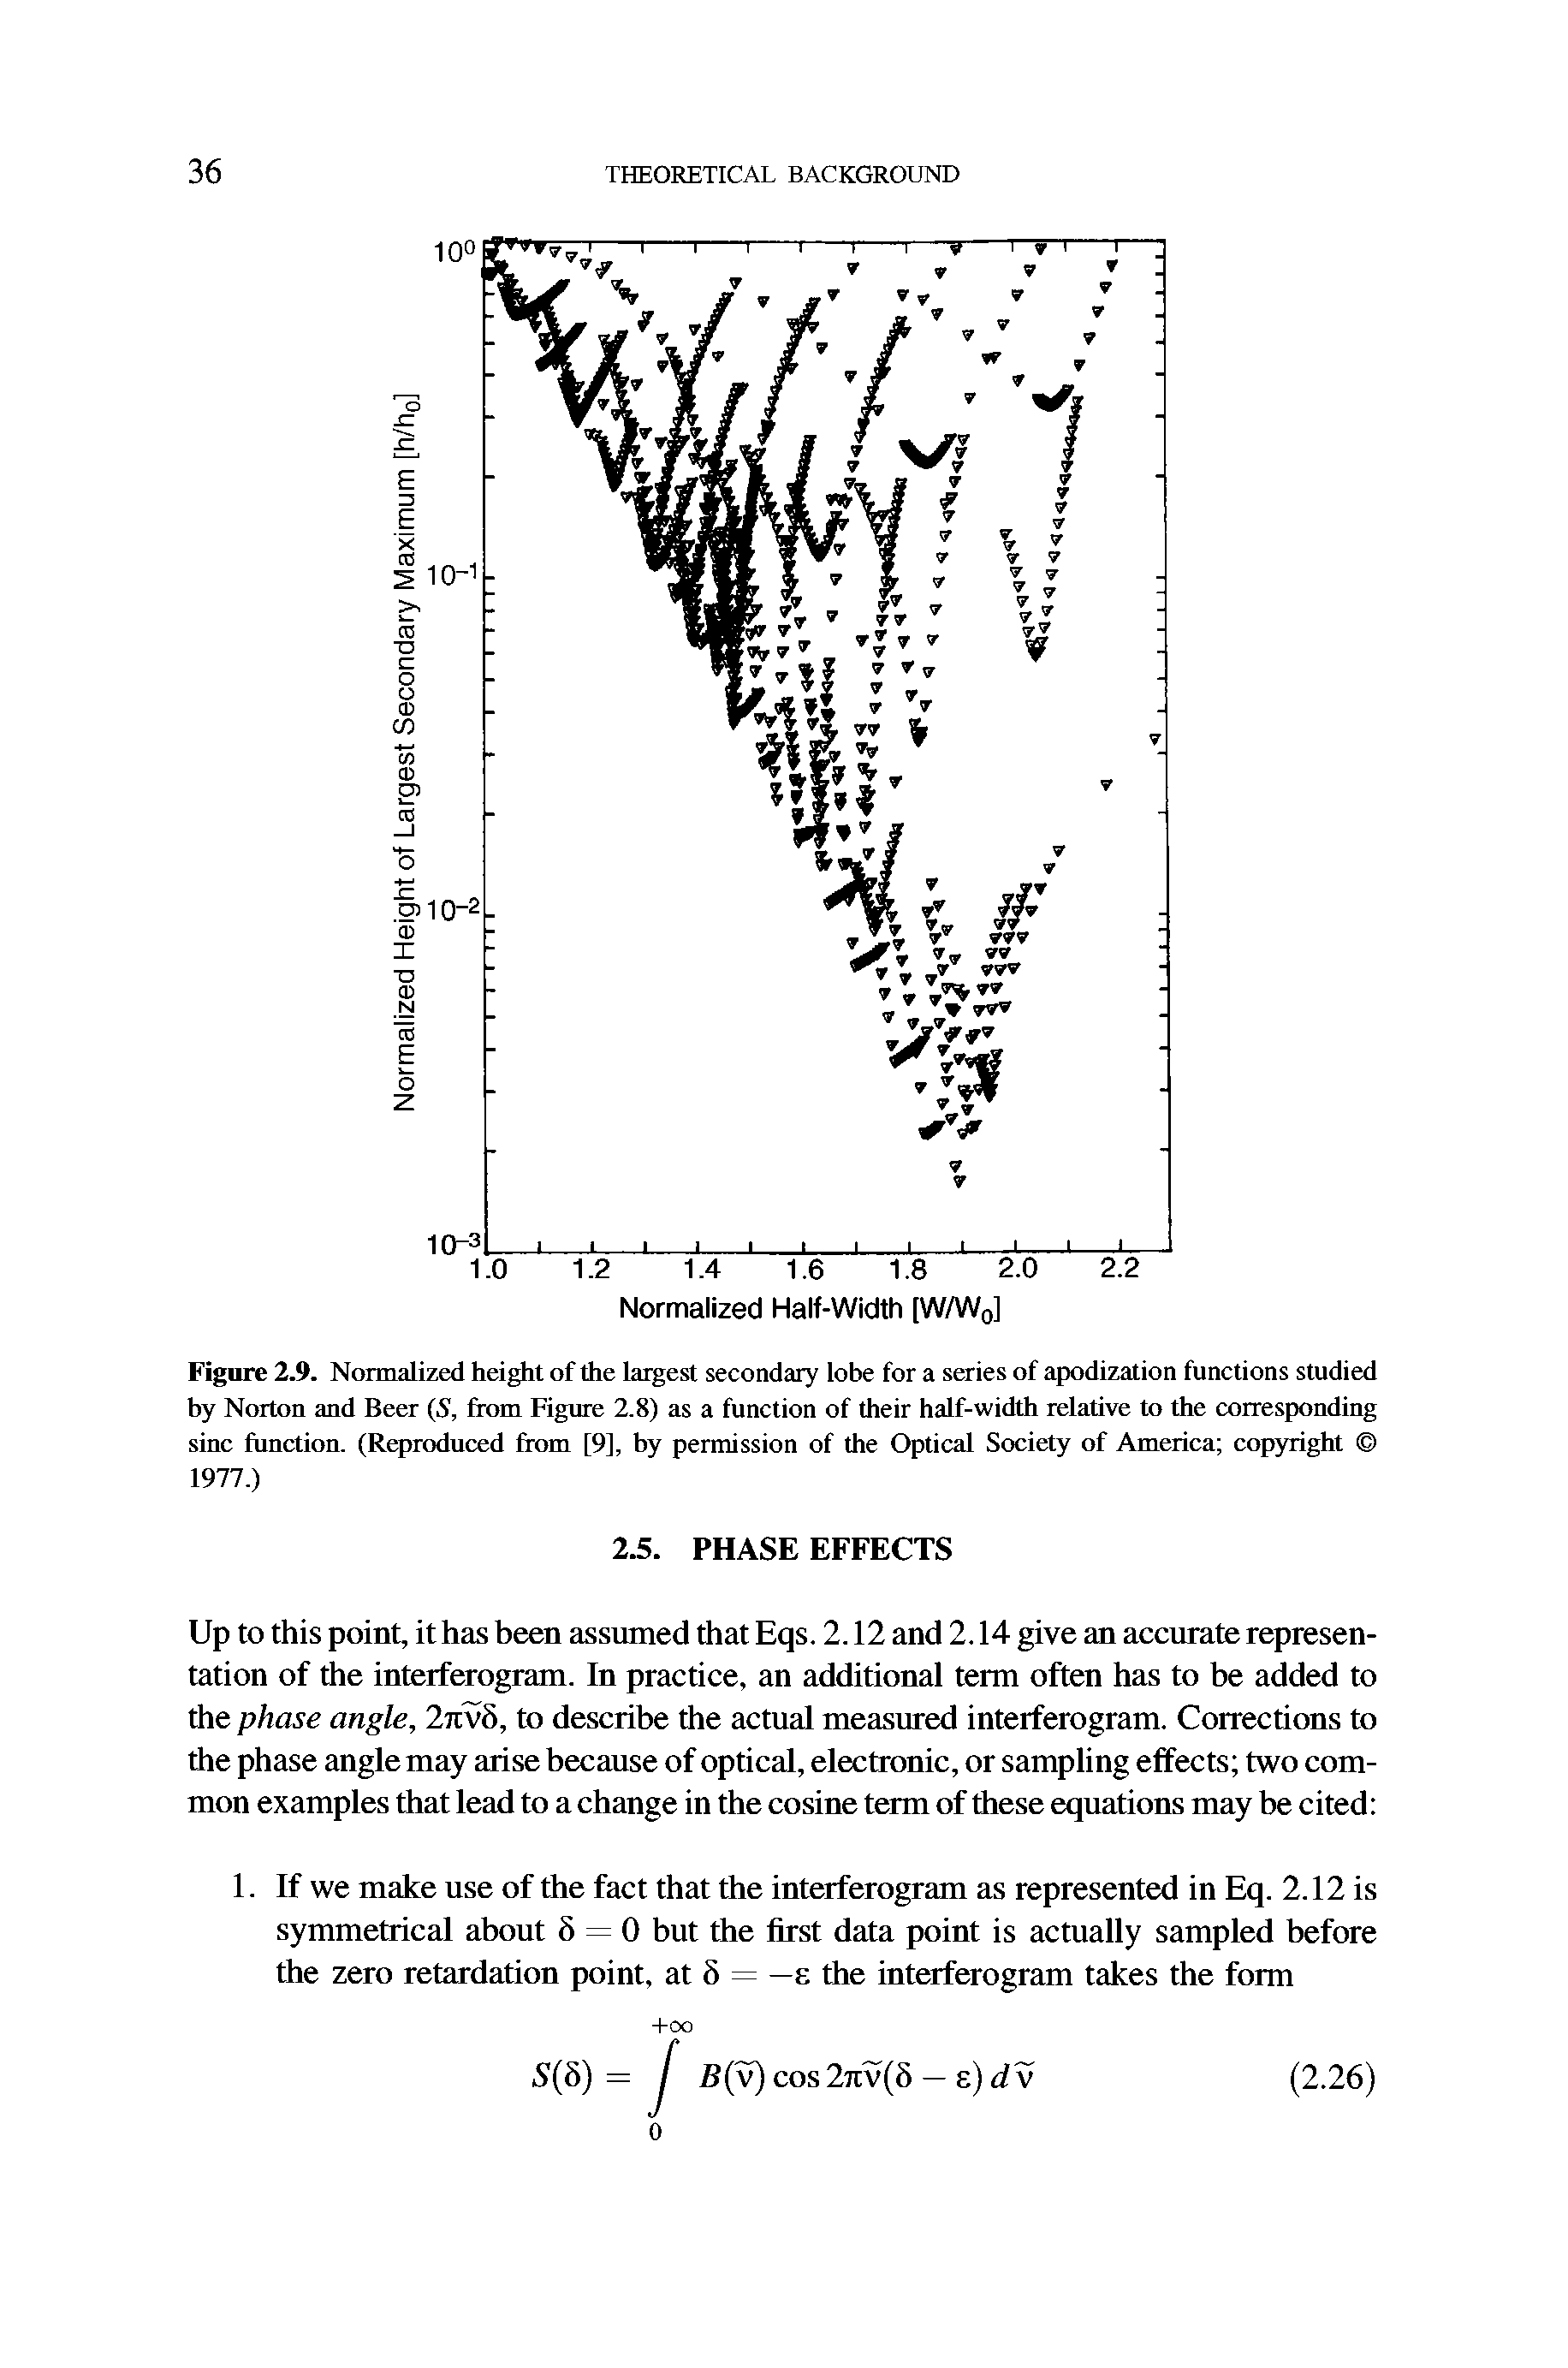 Figure 2.9. Normalized height of the largest secondary lobe for a series of apodization functions studied by Norton and Beer (S, ftom Figure 2.8) as a function of their half-width relative to the corresponding sine function. (Reproduced from [9], by permission of the Optical Society of America copyright 1977.)...